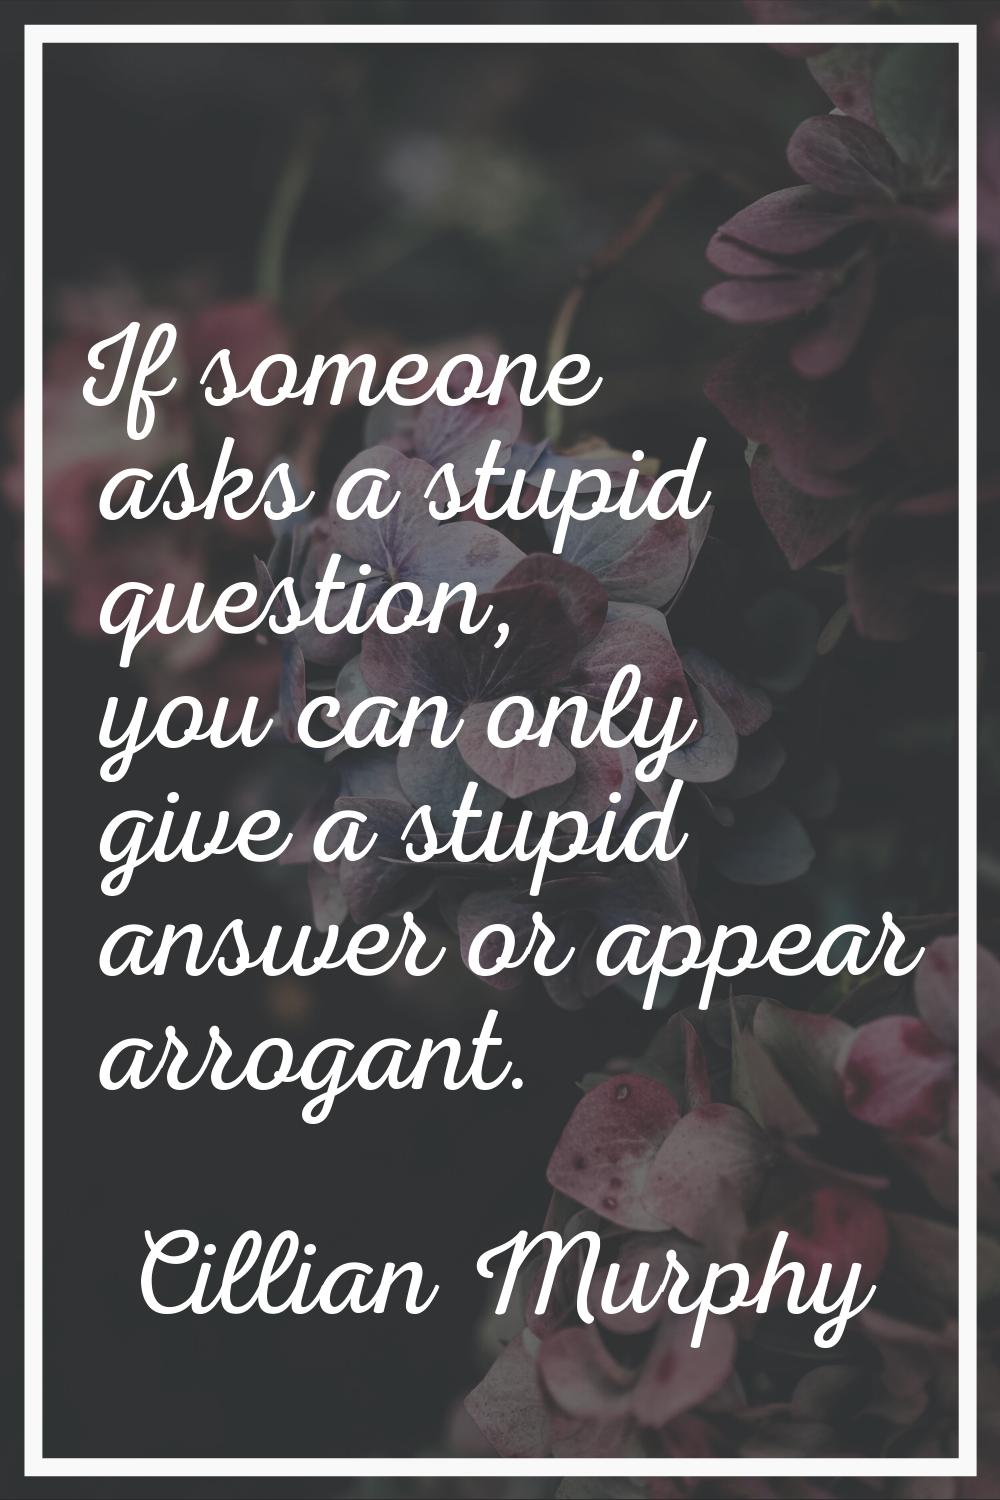 If someone asks a stupid question, you can only give a stupid answer or appear arrogant.